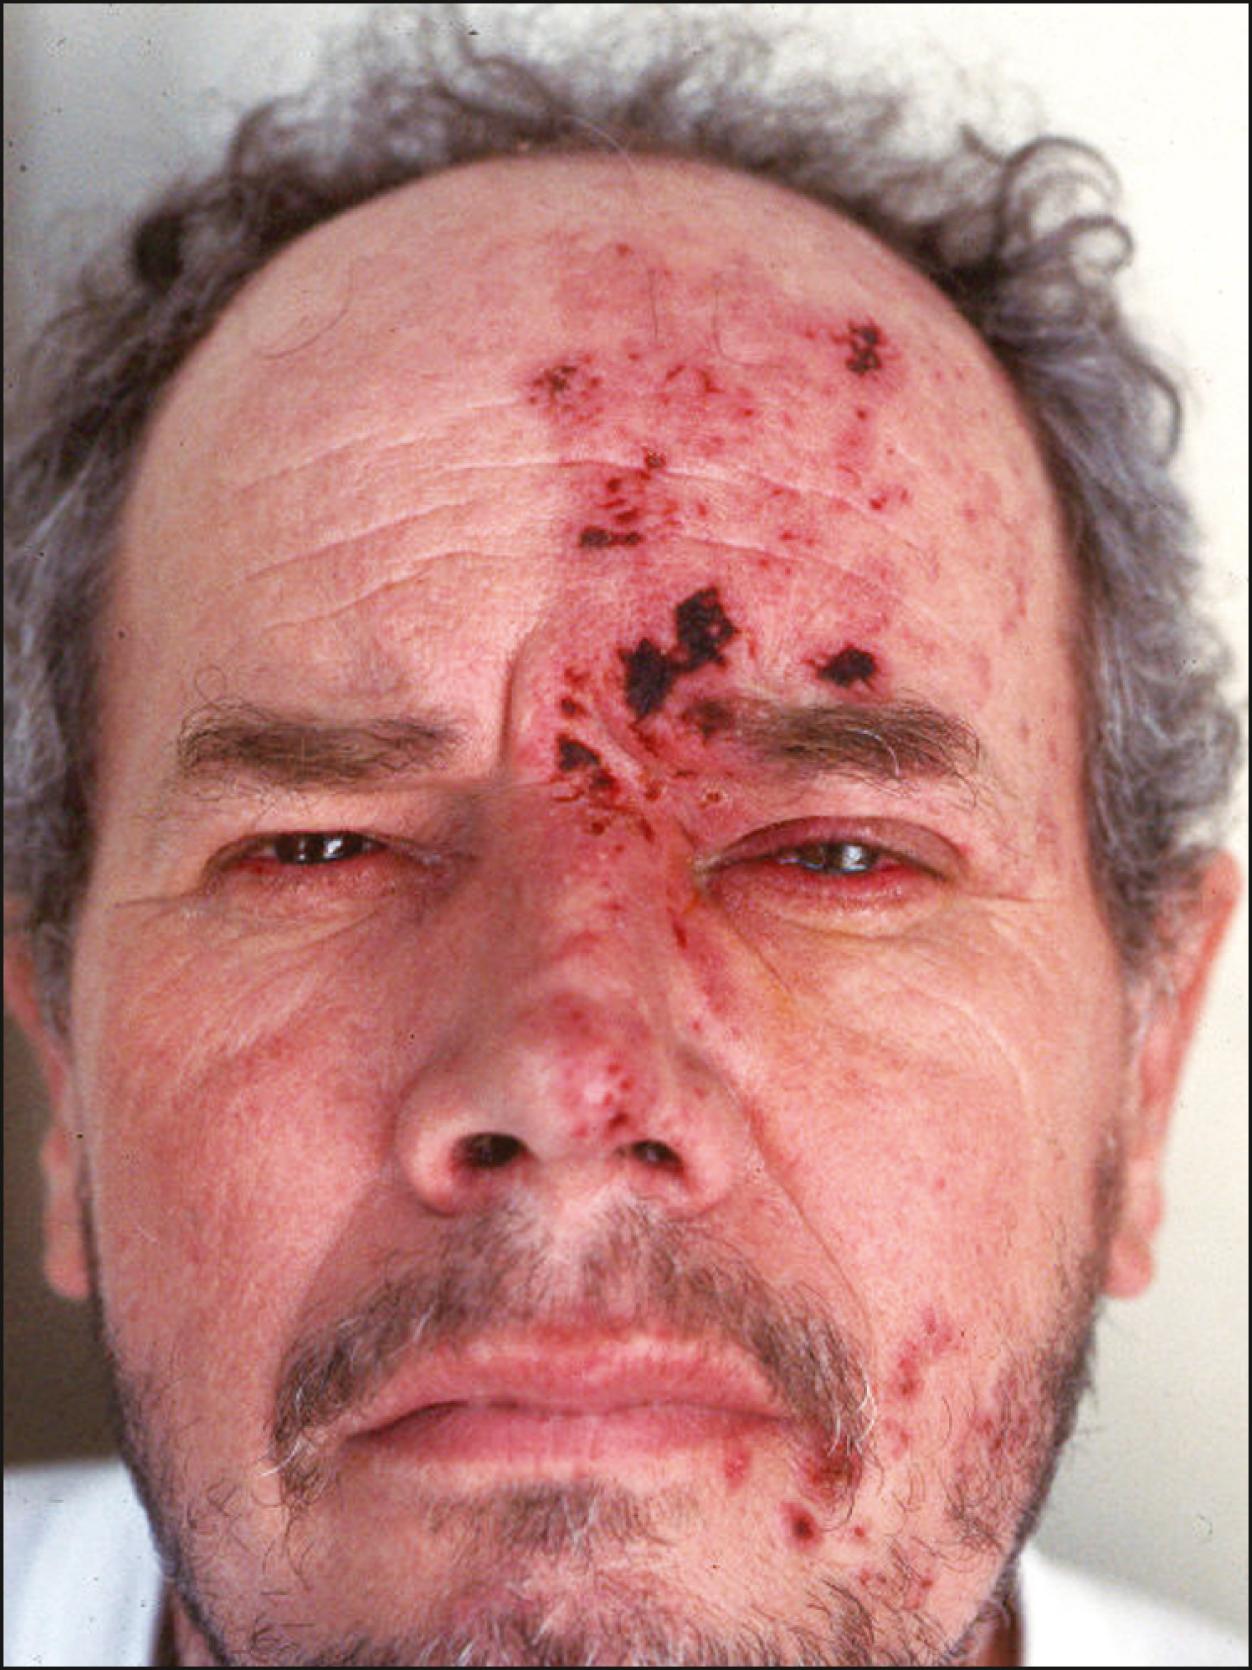 Fig. 30.2, Herpes zoster skin eruption with the classical involvement of the tip of the nose (Hutchinson sign).